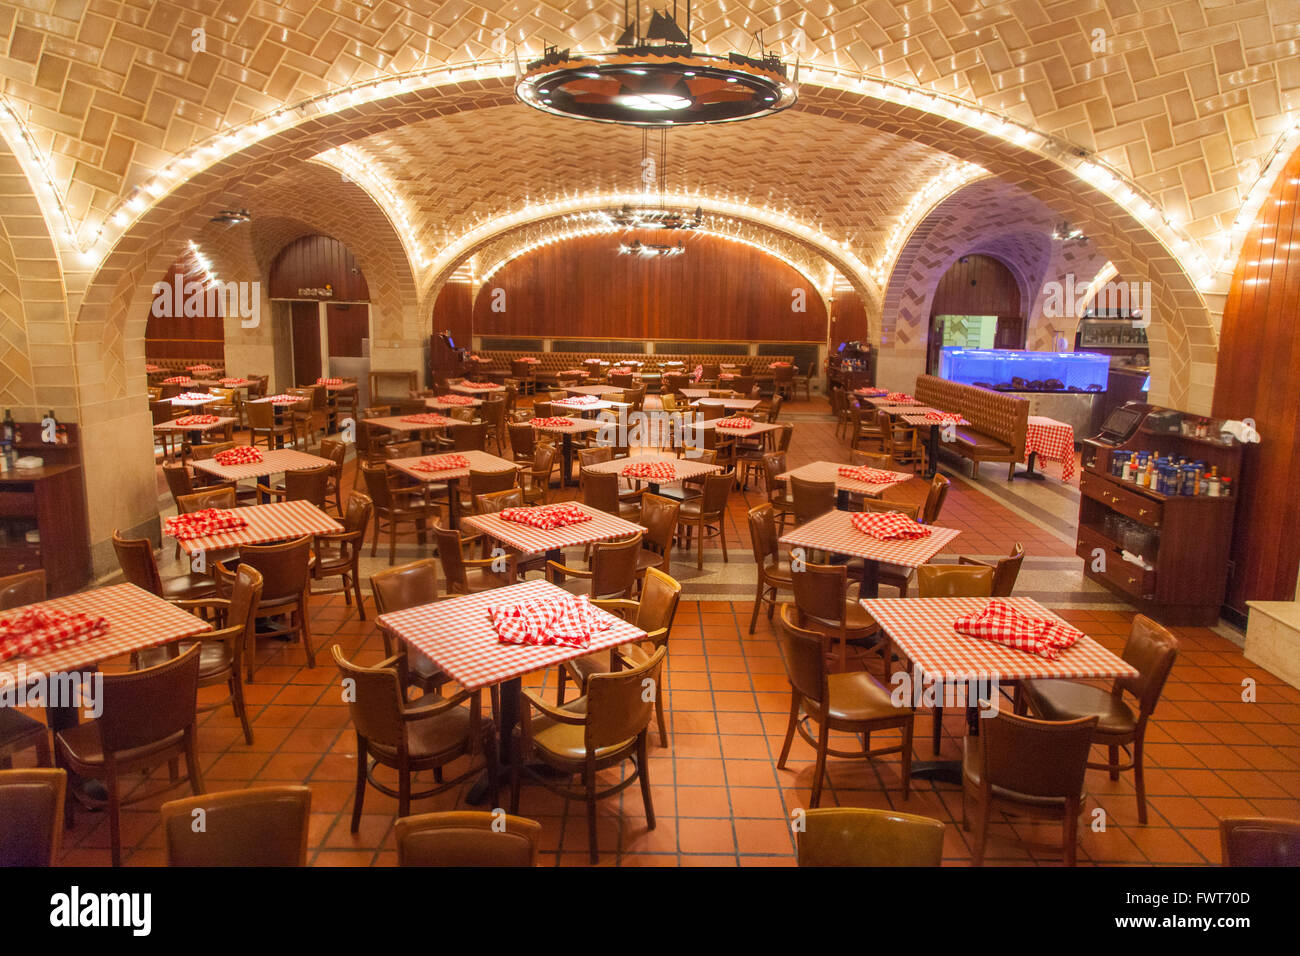 The Oyster bar restaurant, Grand Central Station, Manhattan, New York City,  United States of America Stock Photo - Alamy